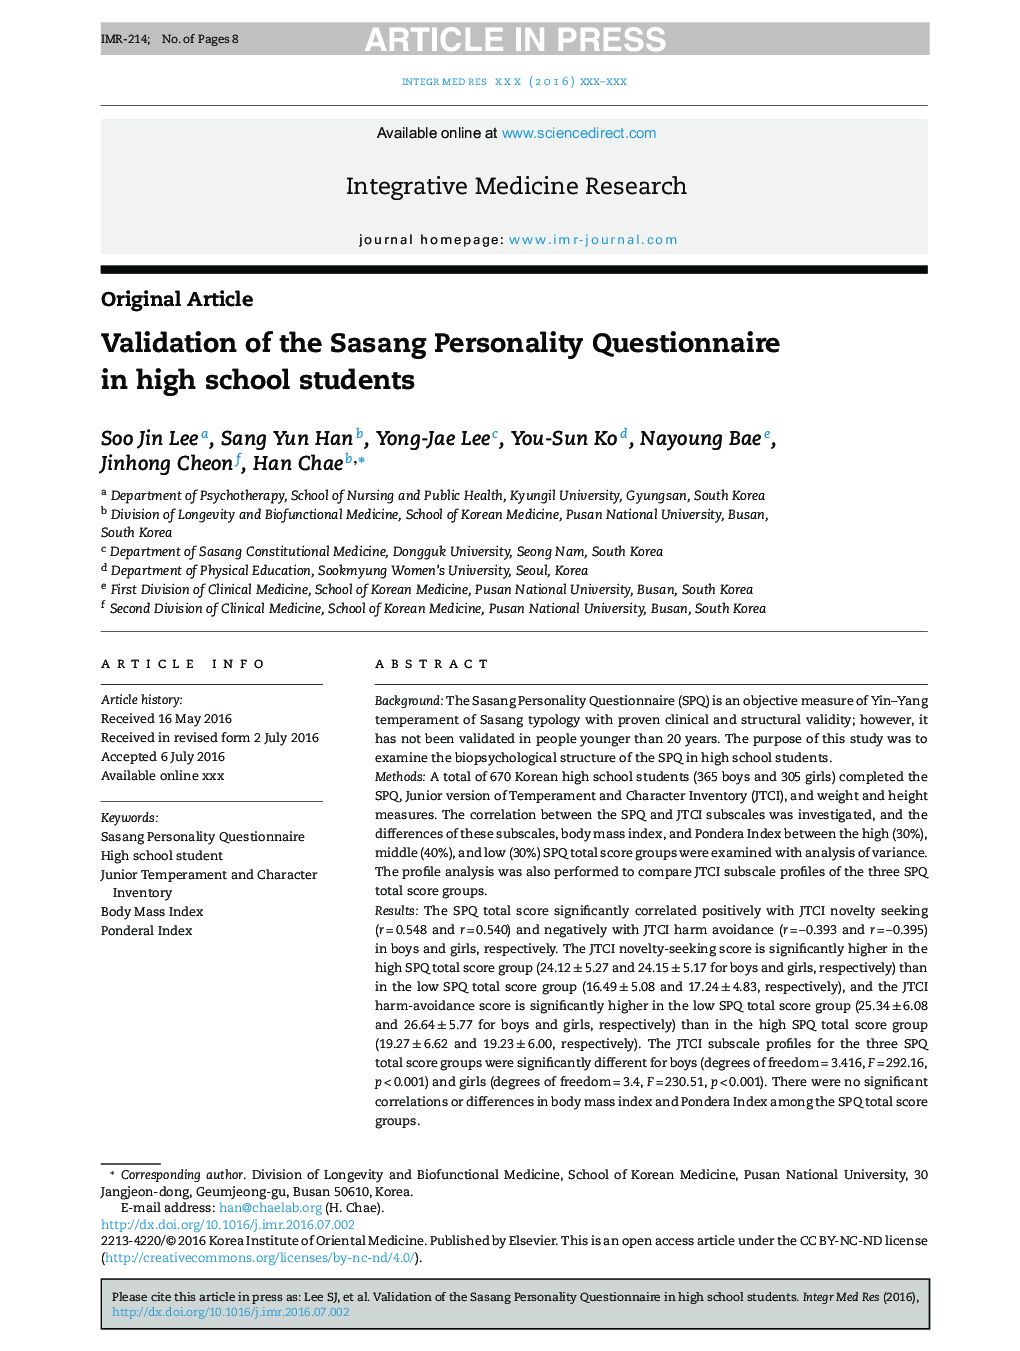 Validation of the Sasang Personality Questionnaire in high school students